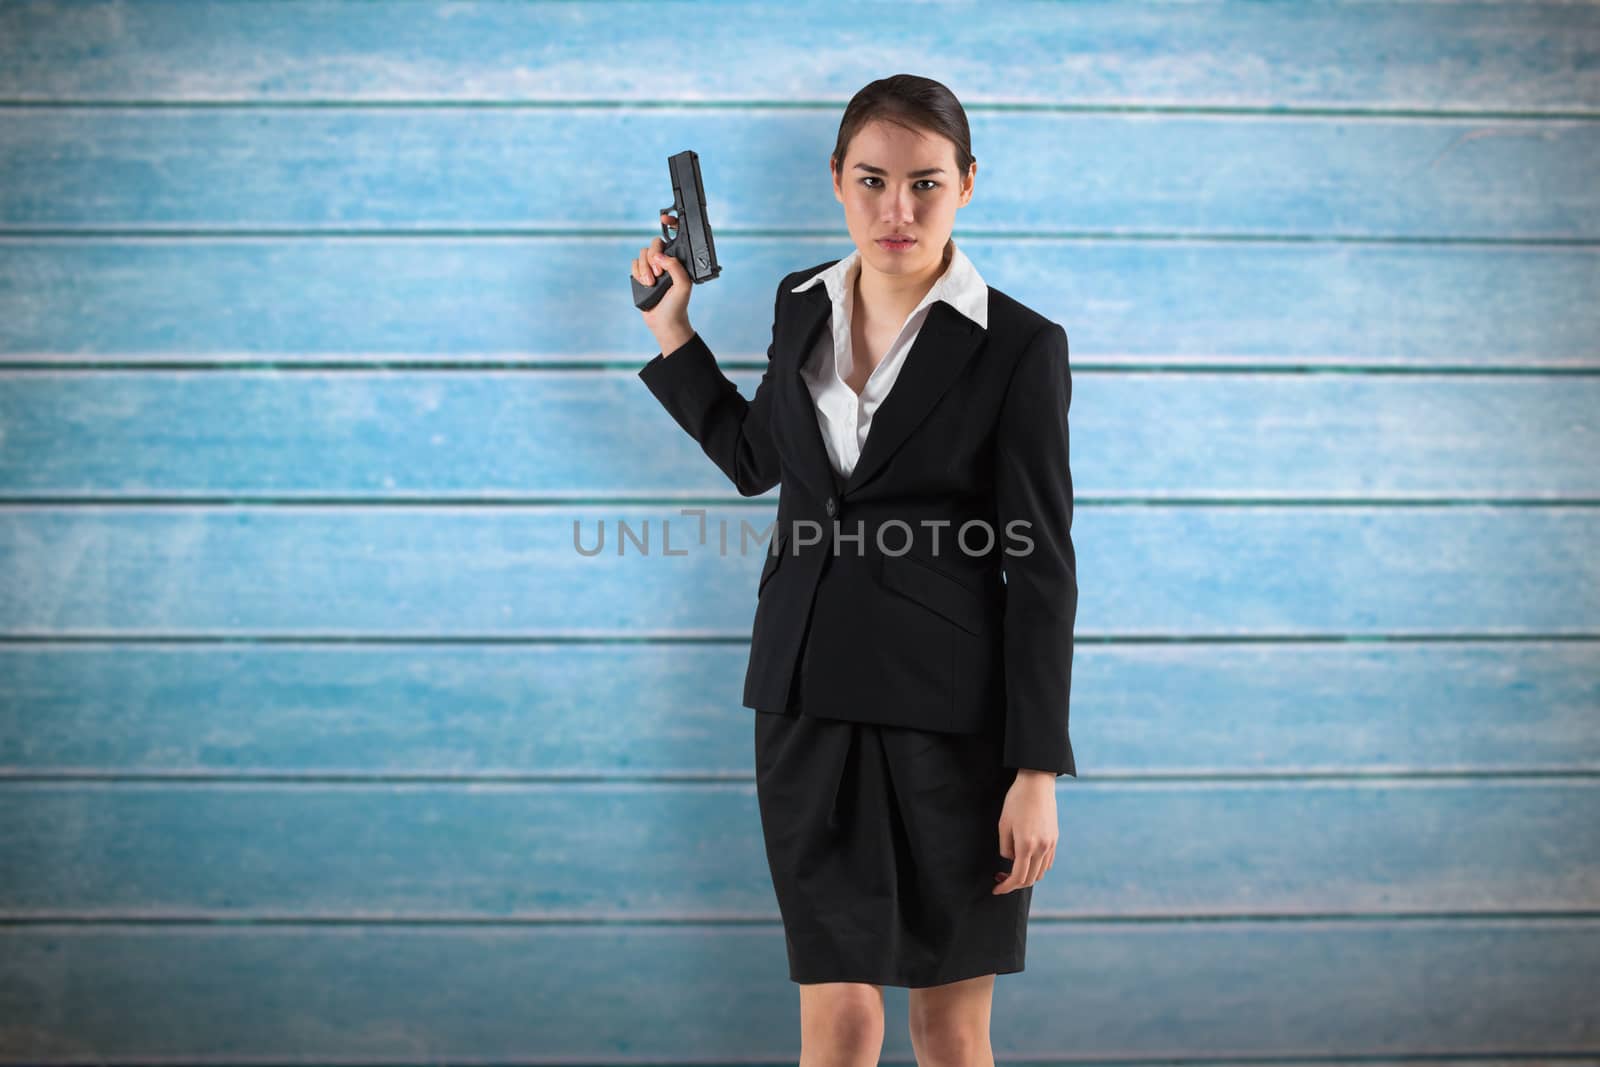 Composite image of businesswoman holding a gun by Wavebreakmedia